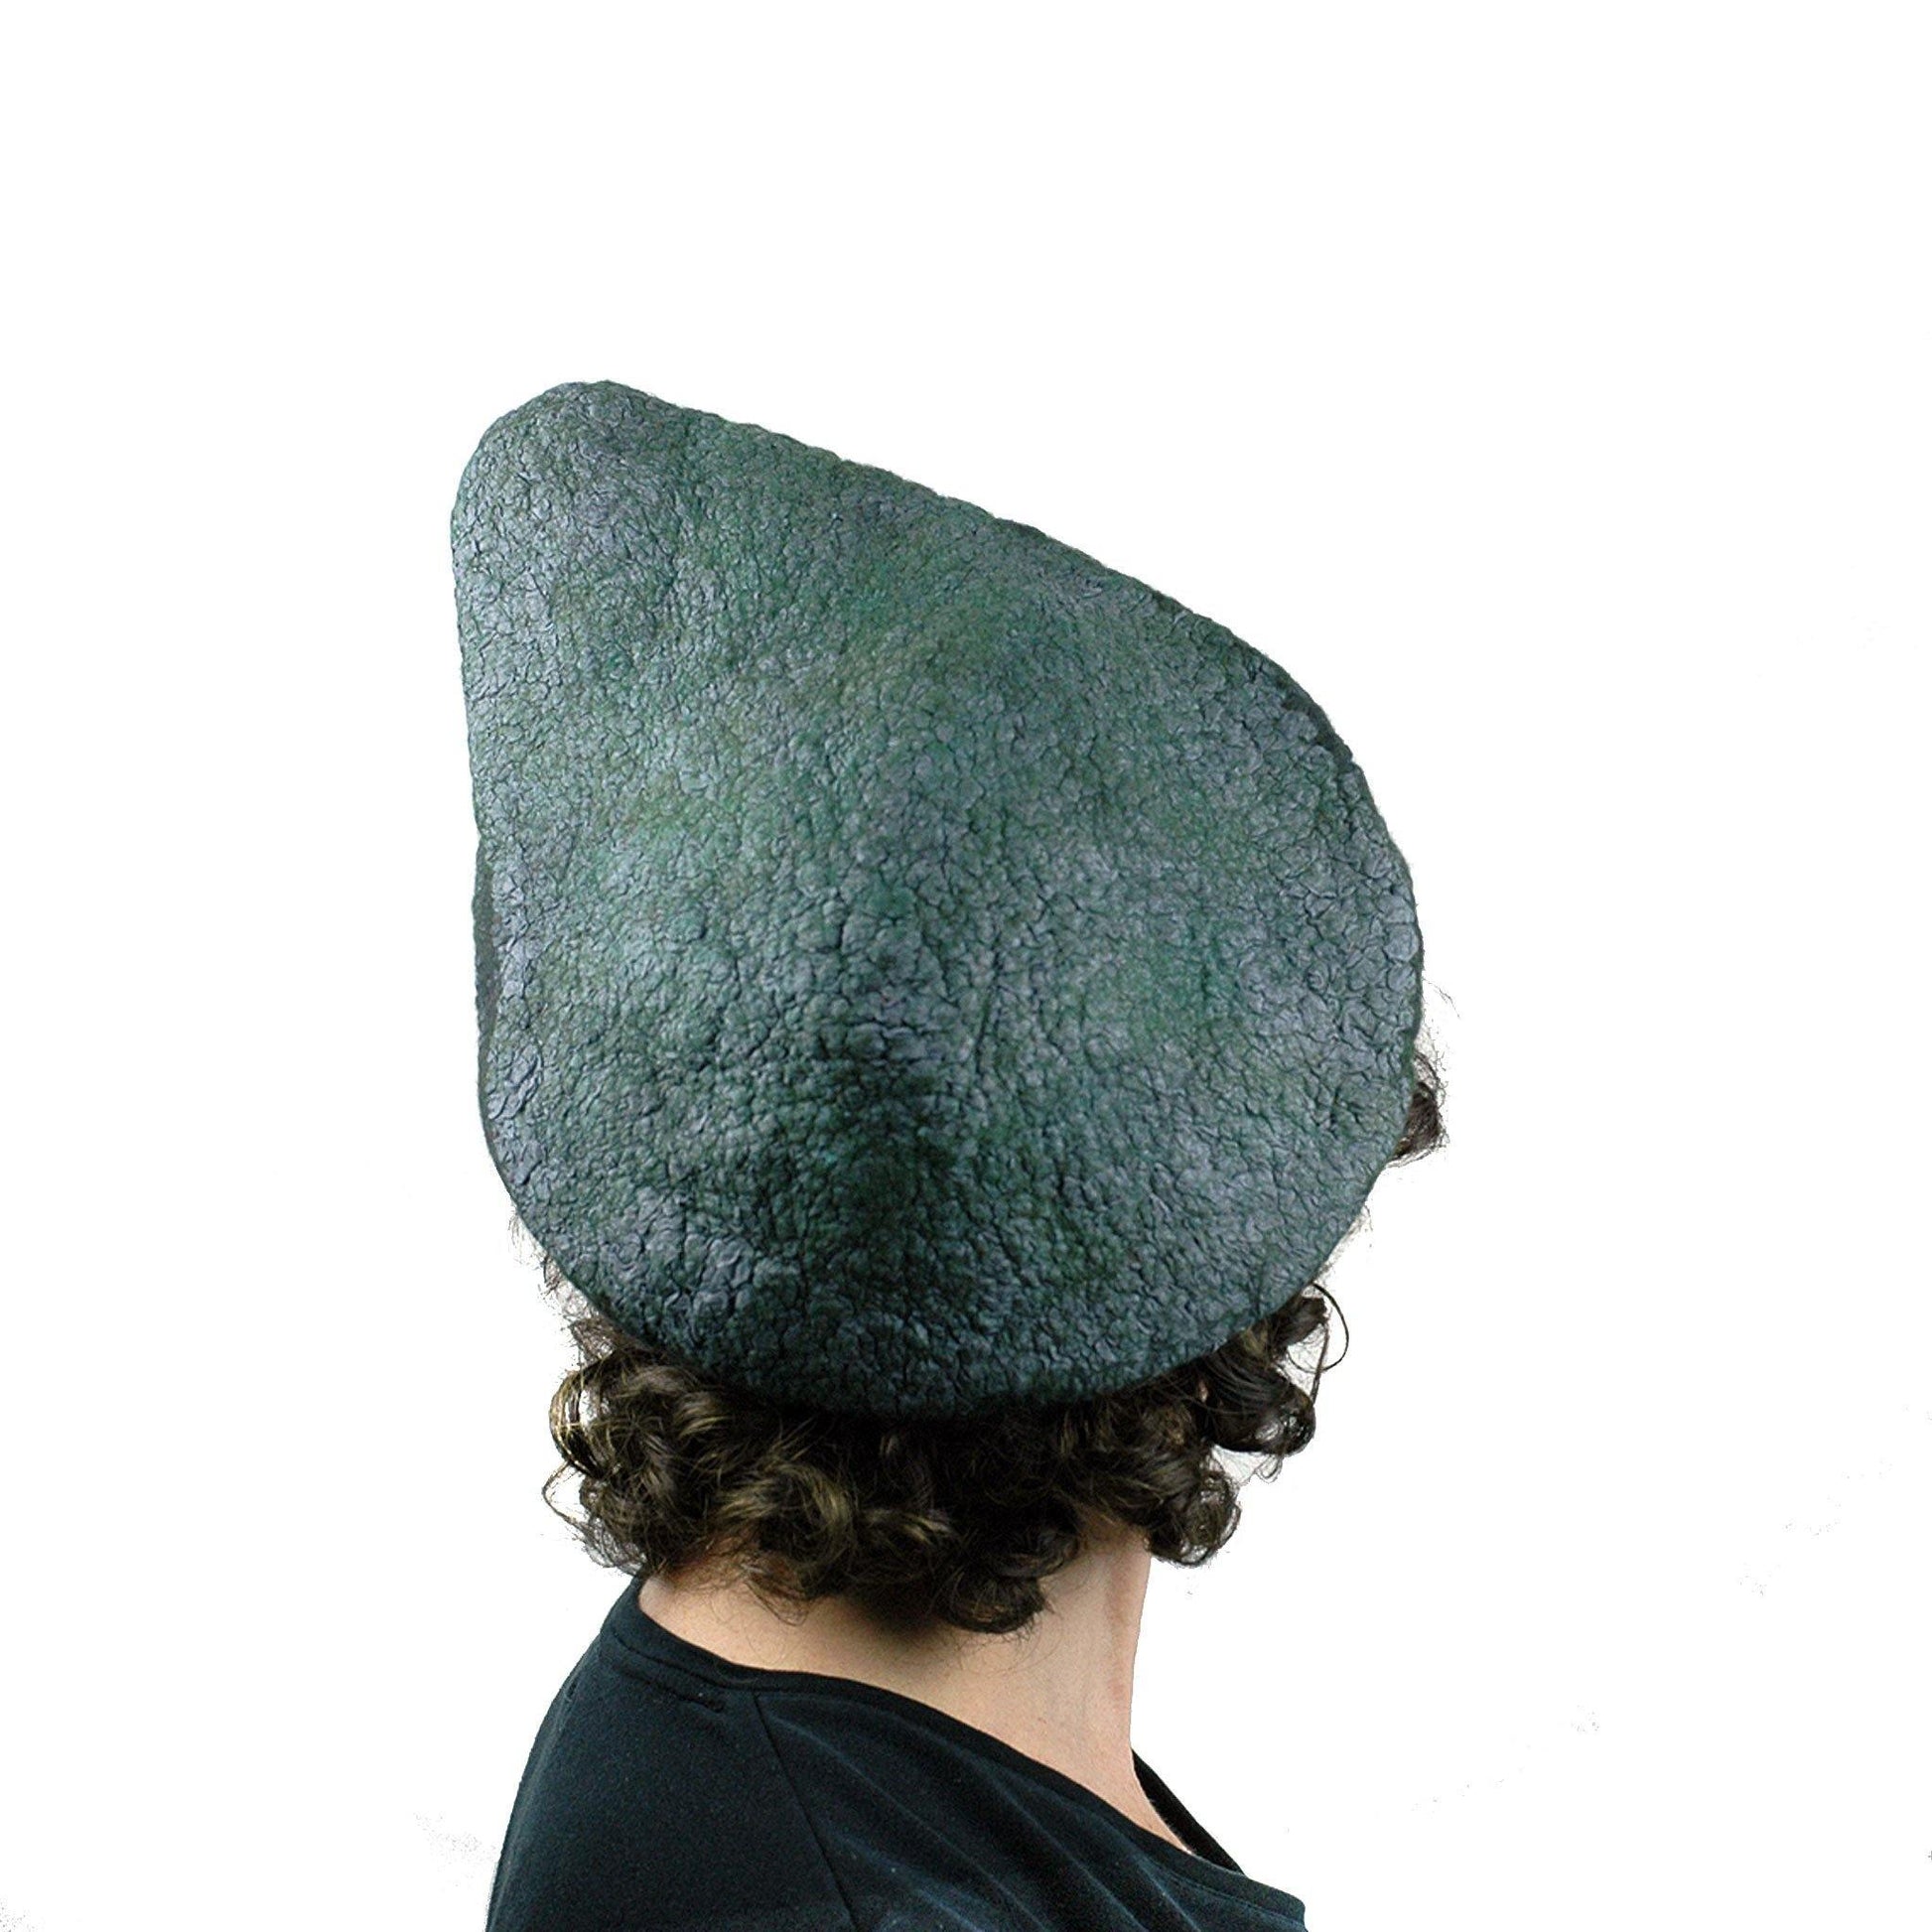 Felted Avocado Hat - back view